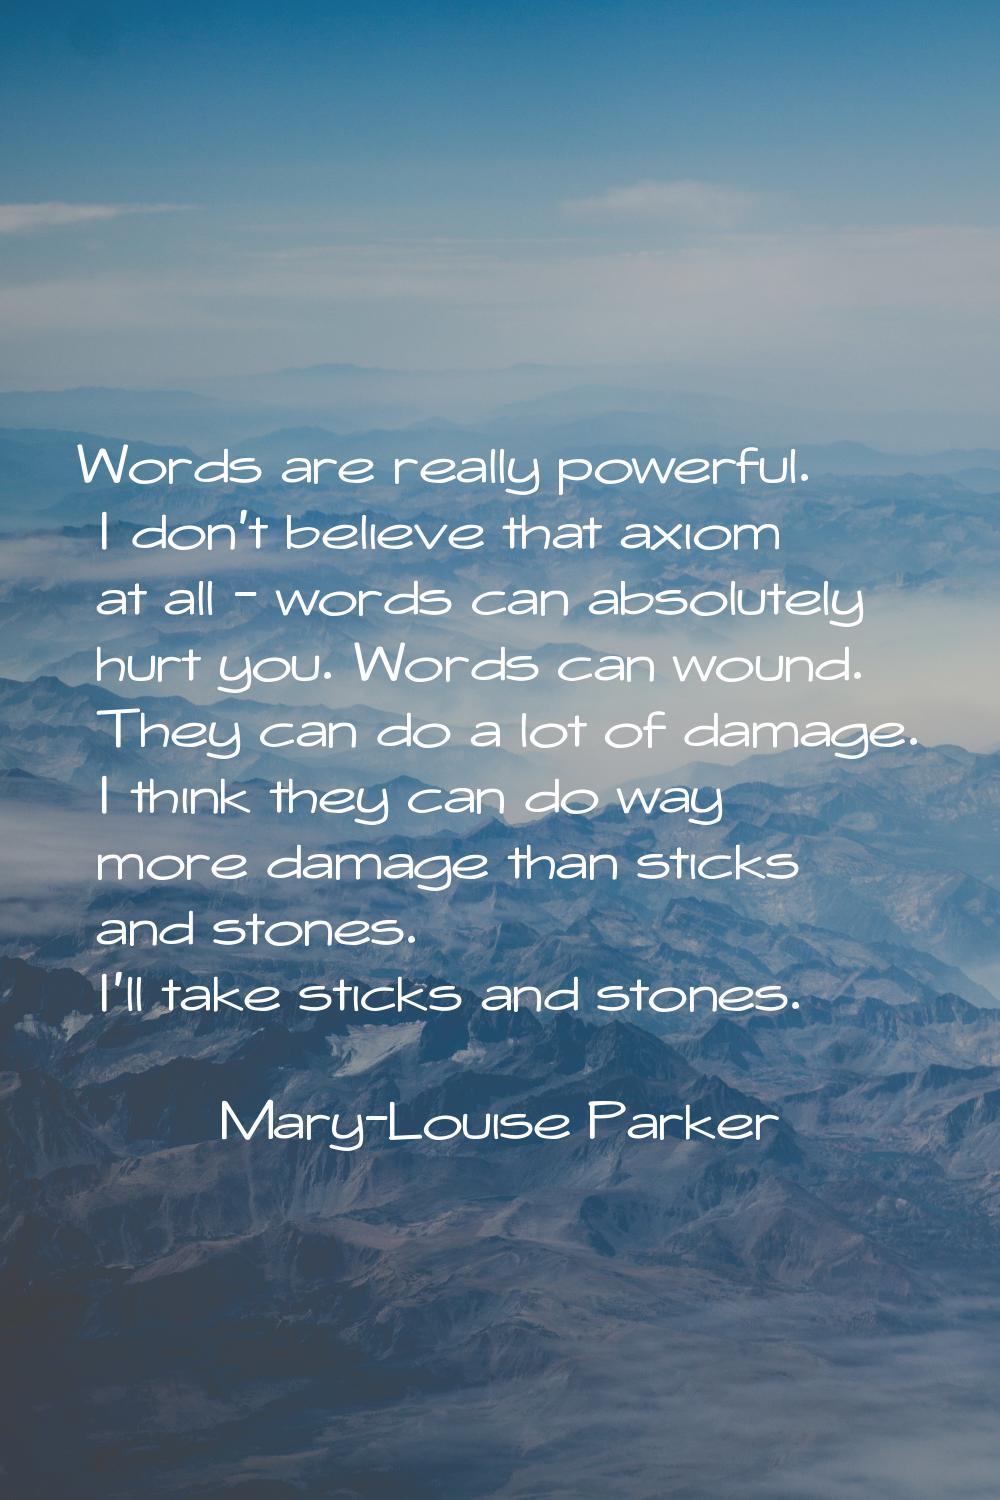 Words are really powerful. I don't believe that axiom at all - words can absolutely hurt you. Words